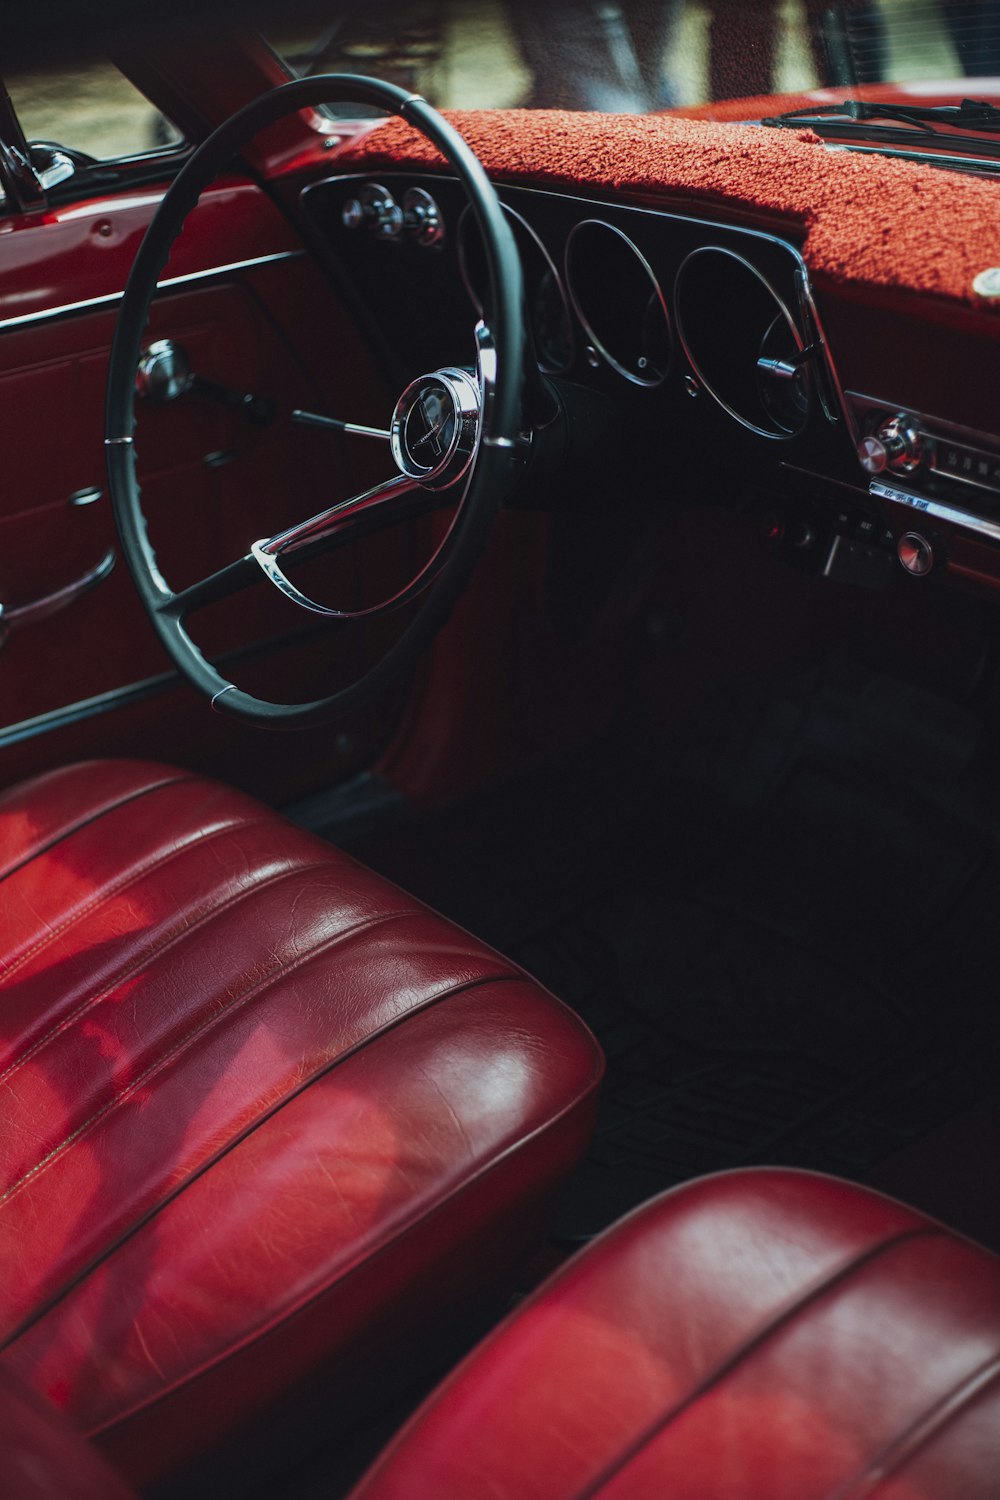 the interior of a classic car with red leather seats